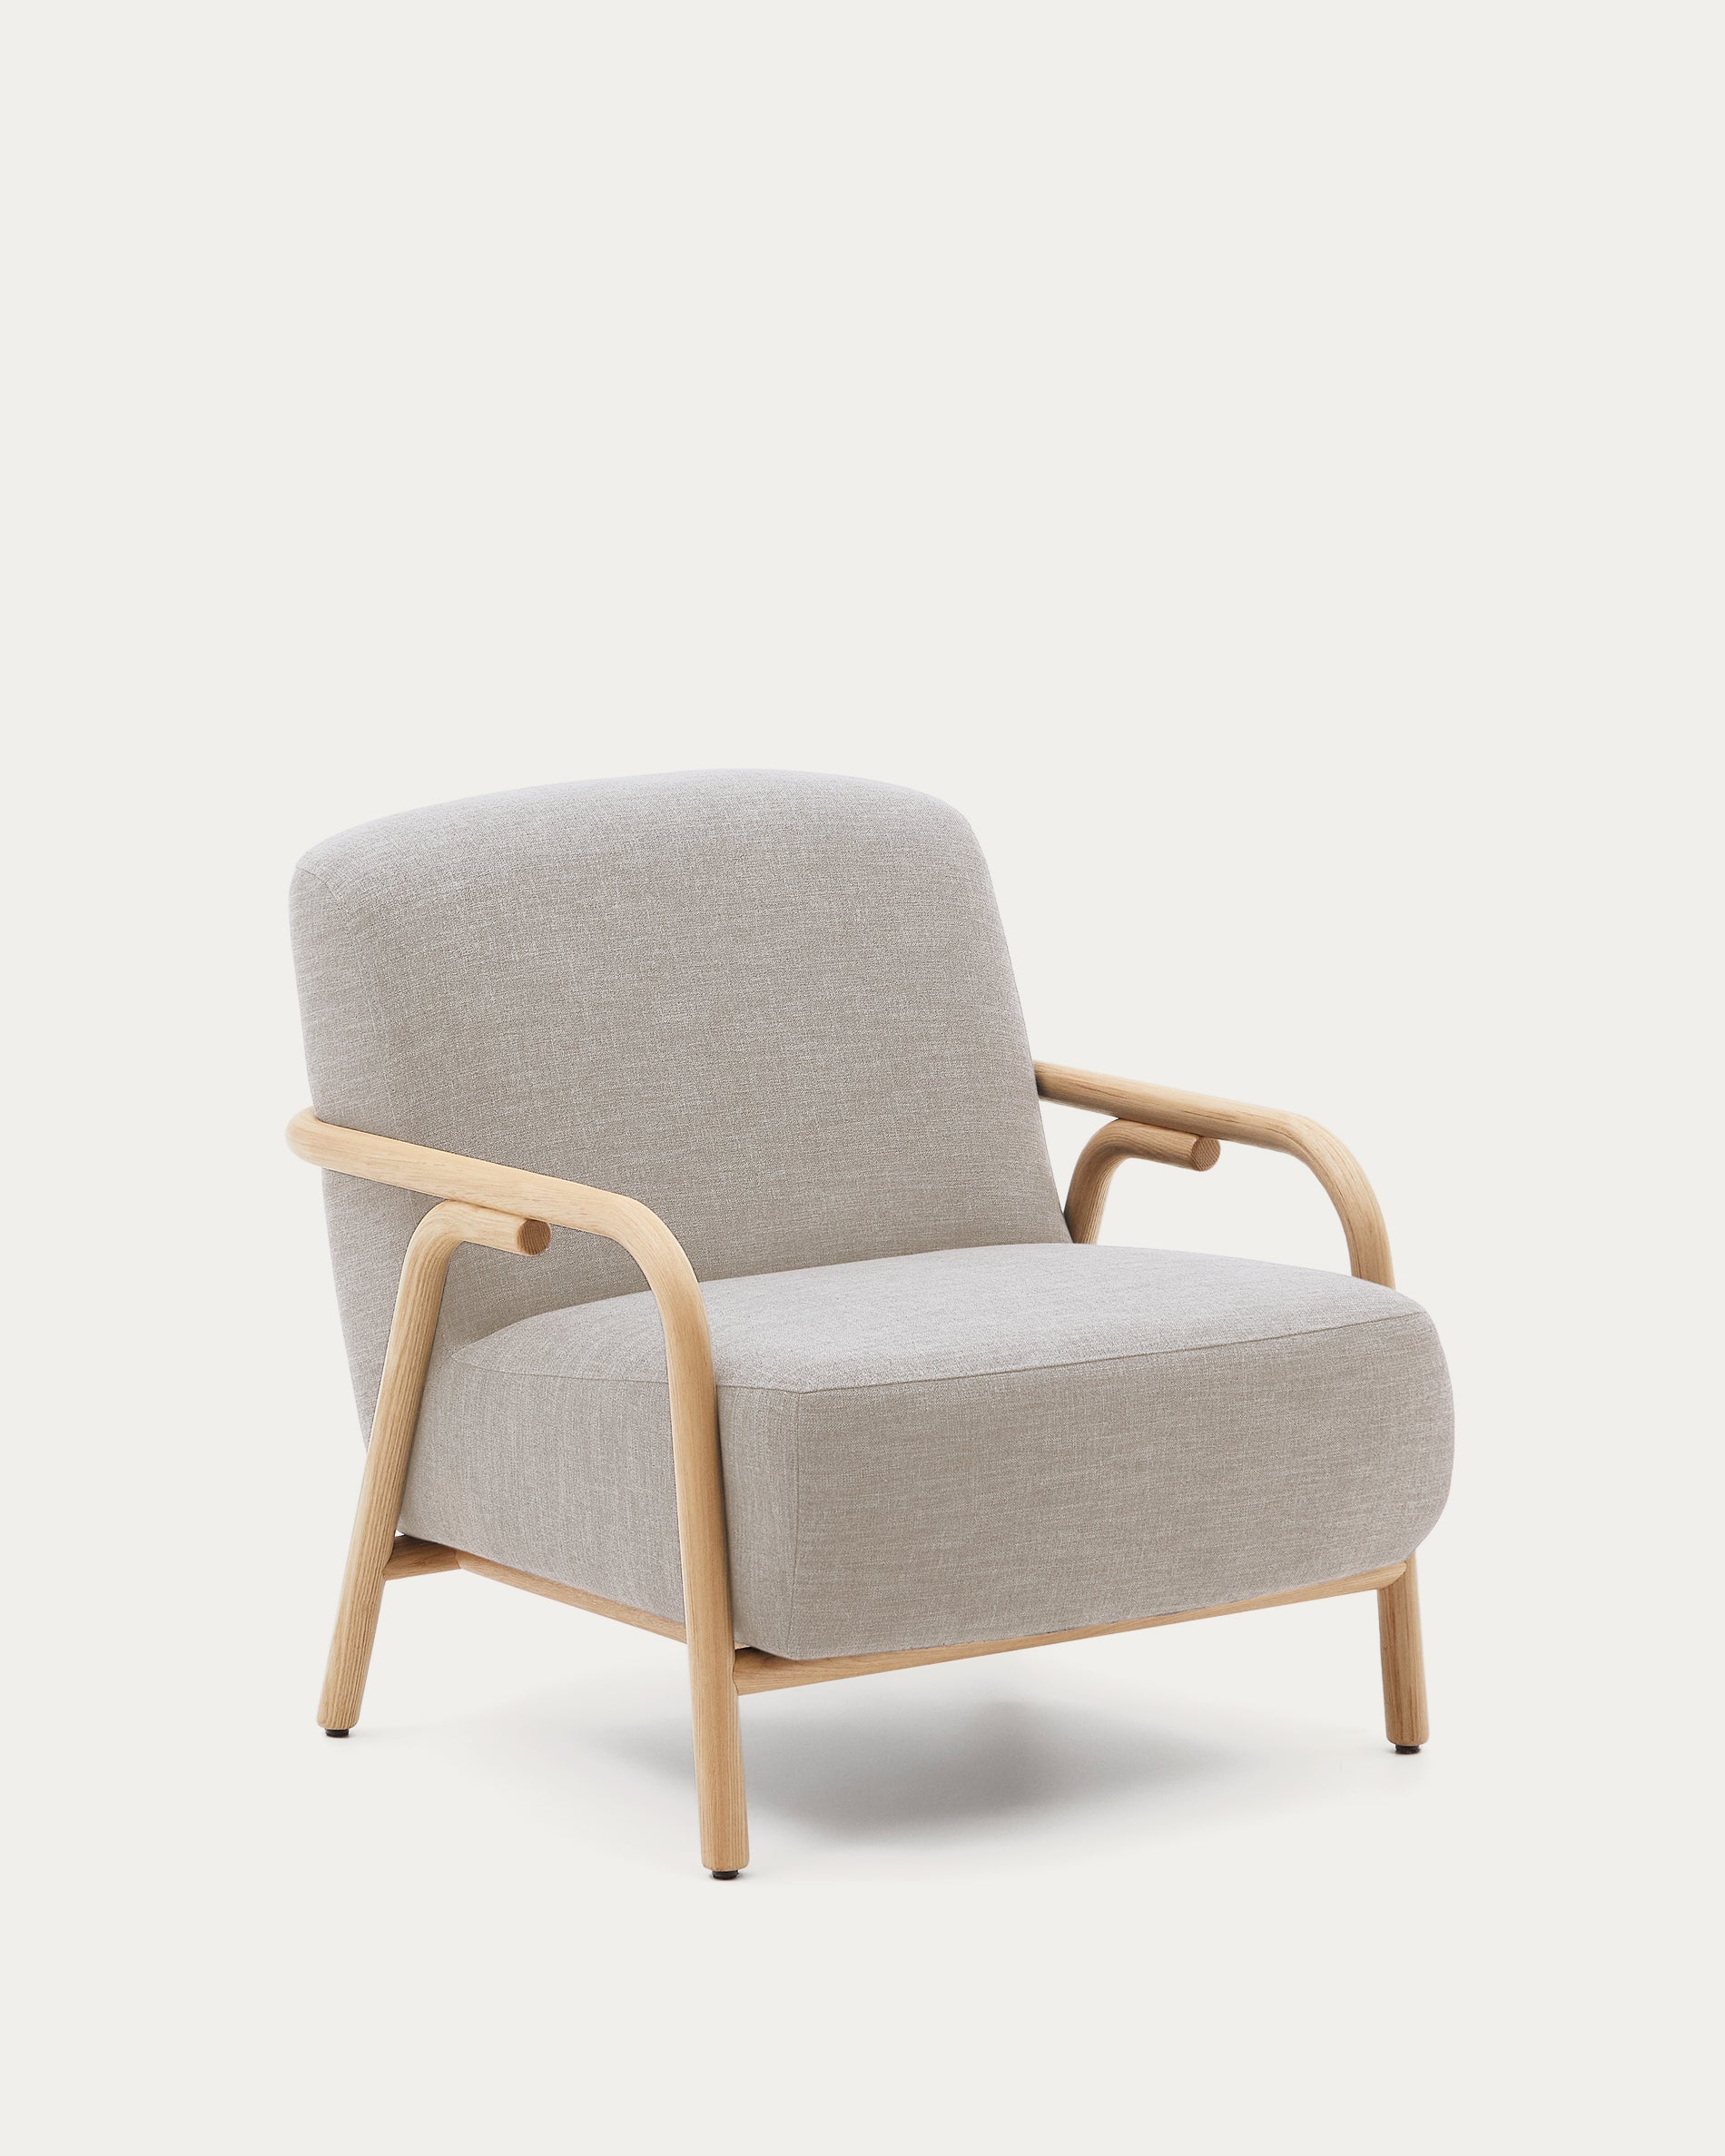 Sylo beige armchair, made of solid ash wood, 100% FSC